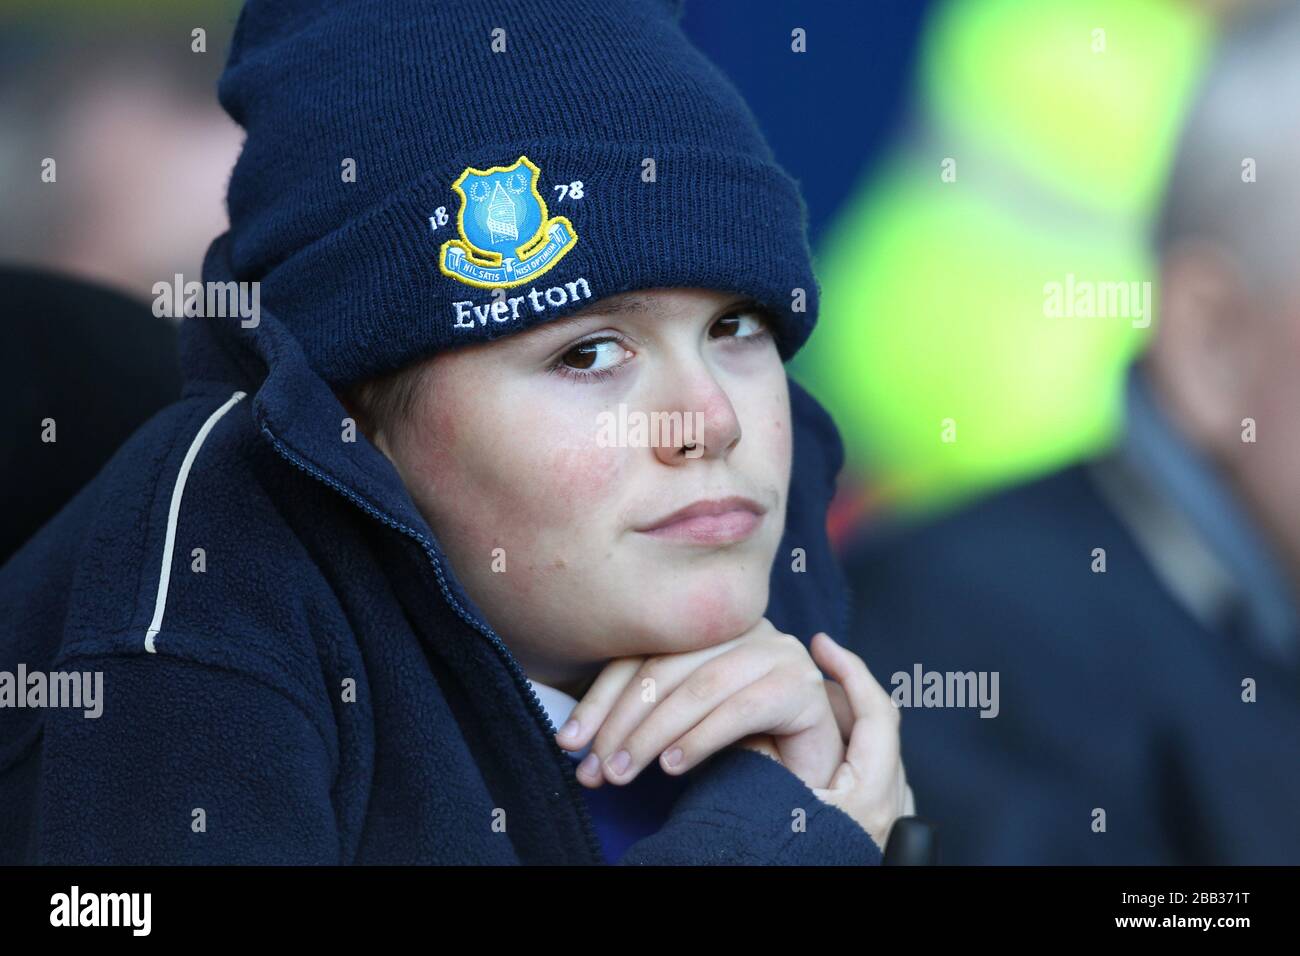 A young Everton fan in the stands Stock Photo